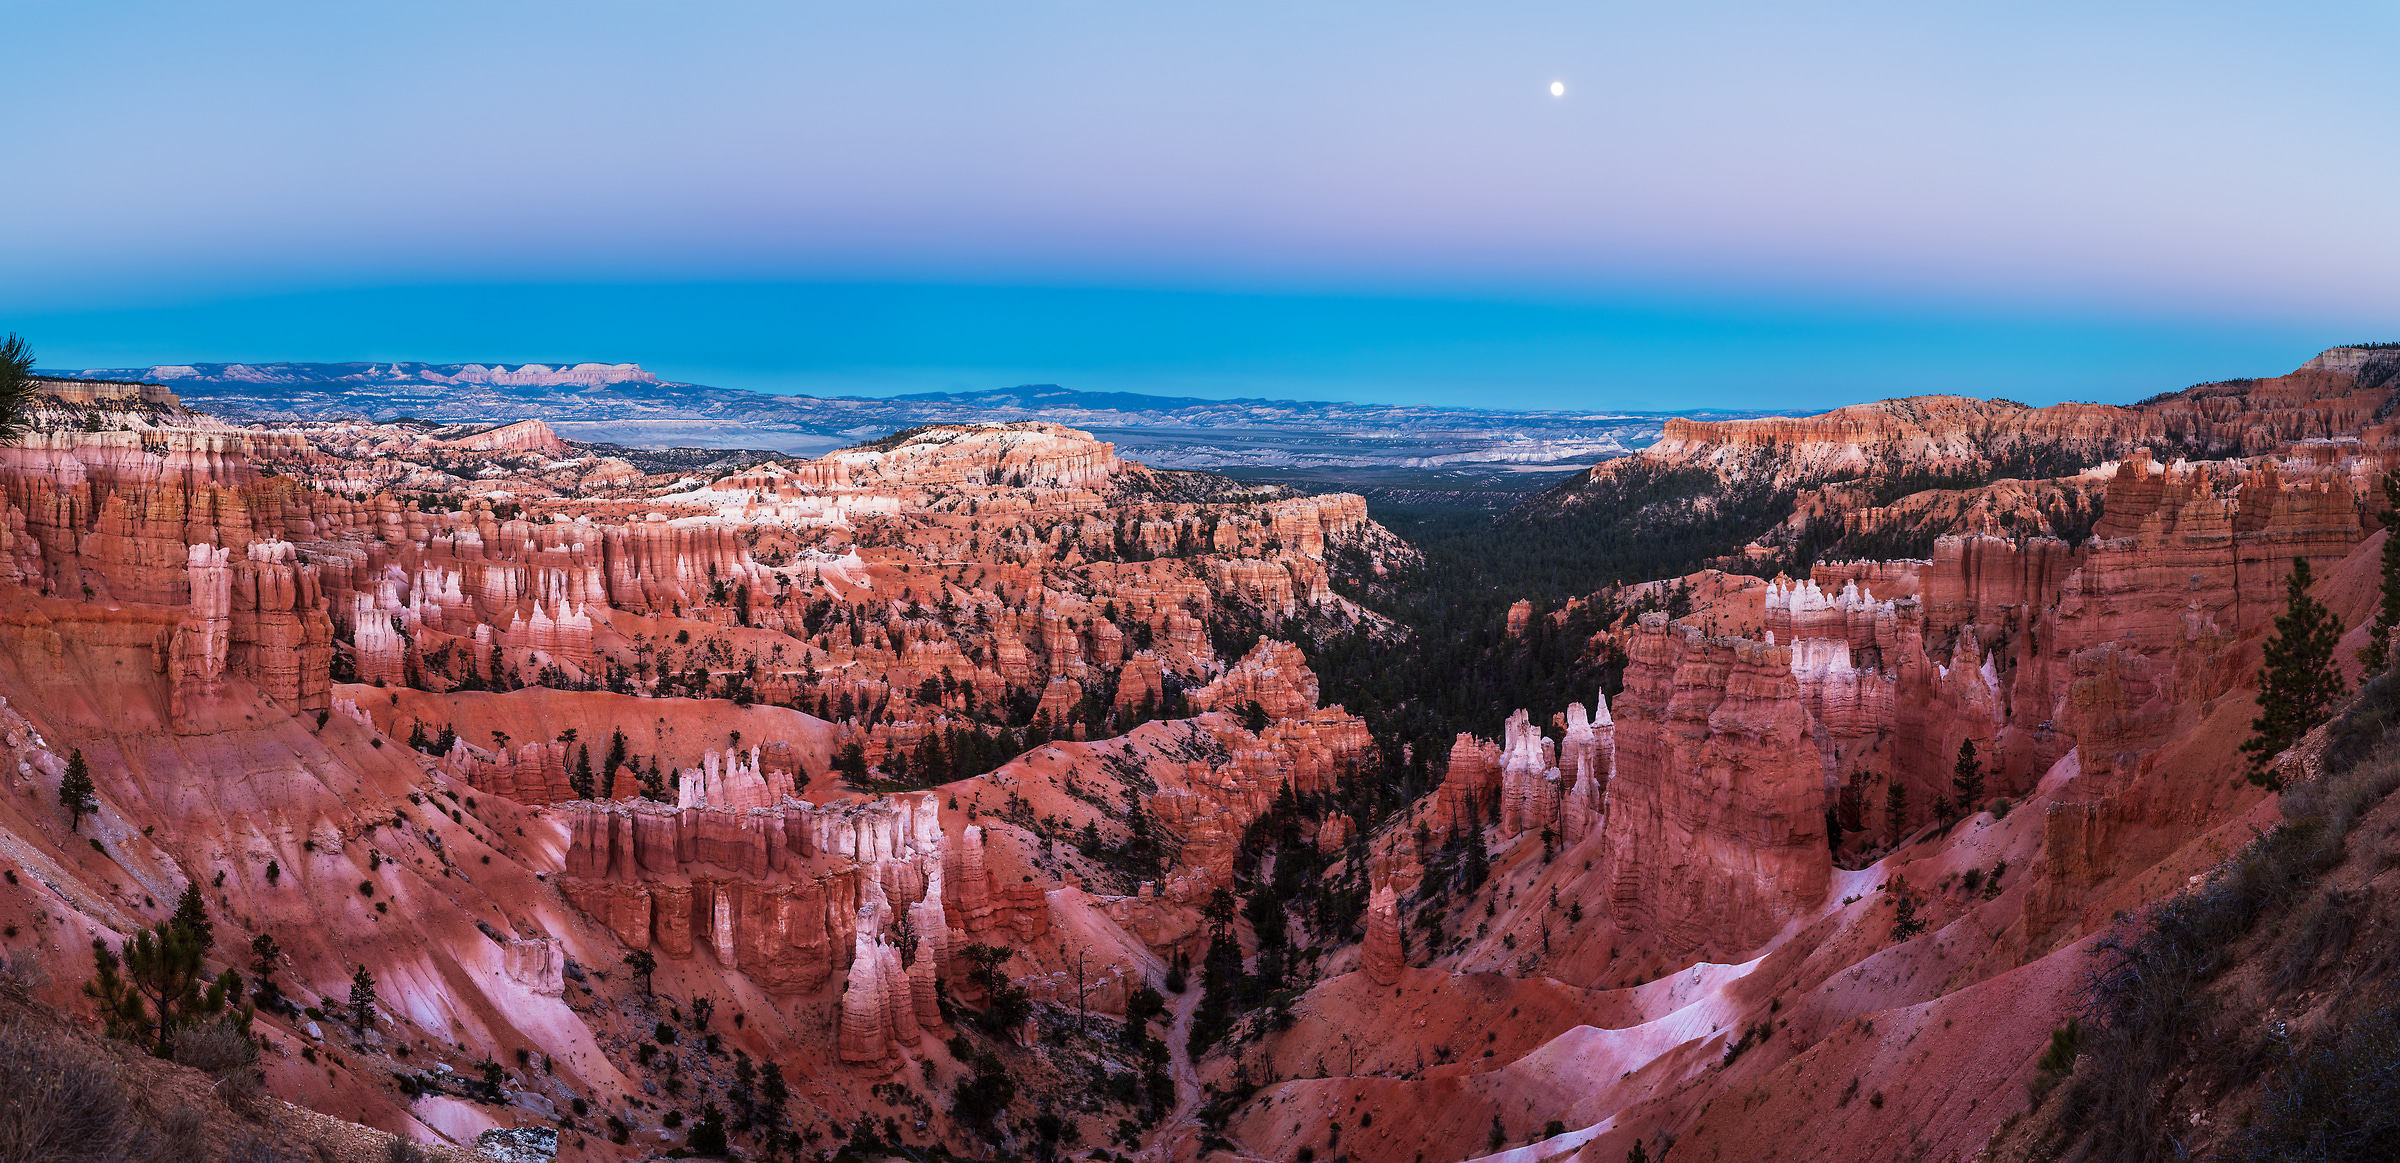 205 megapixels! A very high resolution, large-format VAST photo print of the American West at evening; landscape photograph created by Jim Tarpo in Bryce Canyon, Utah